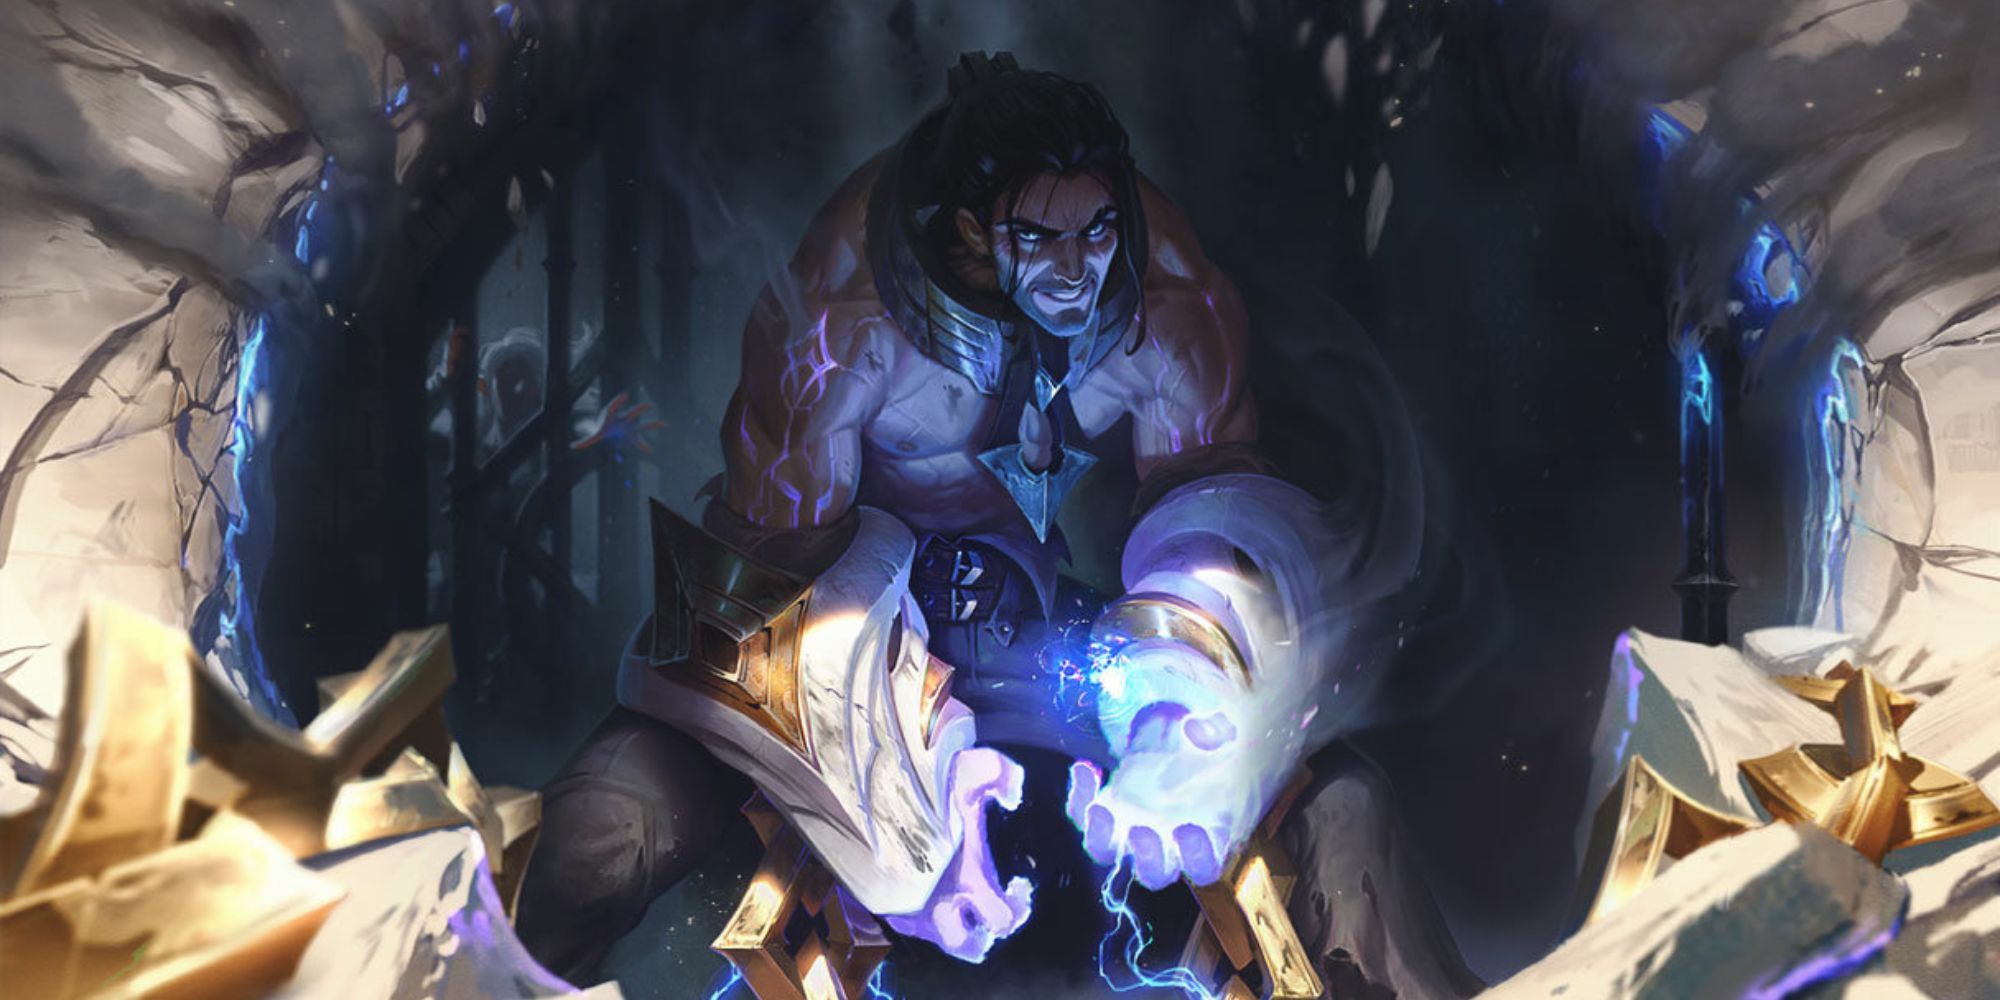 Image shows Sylas from League of Legends.